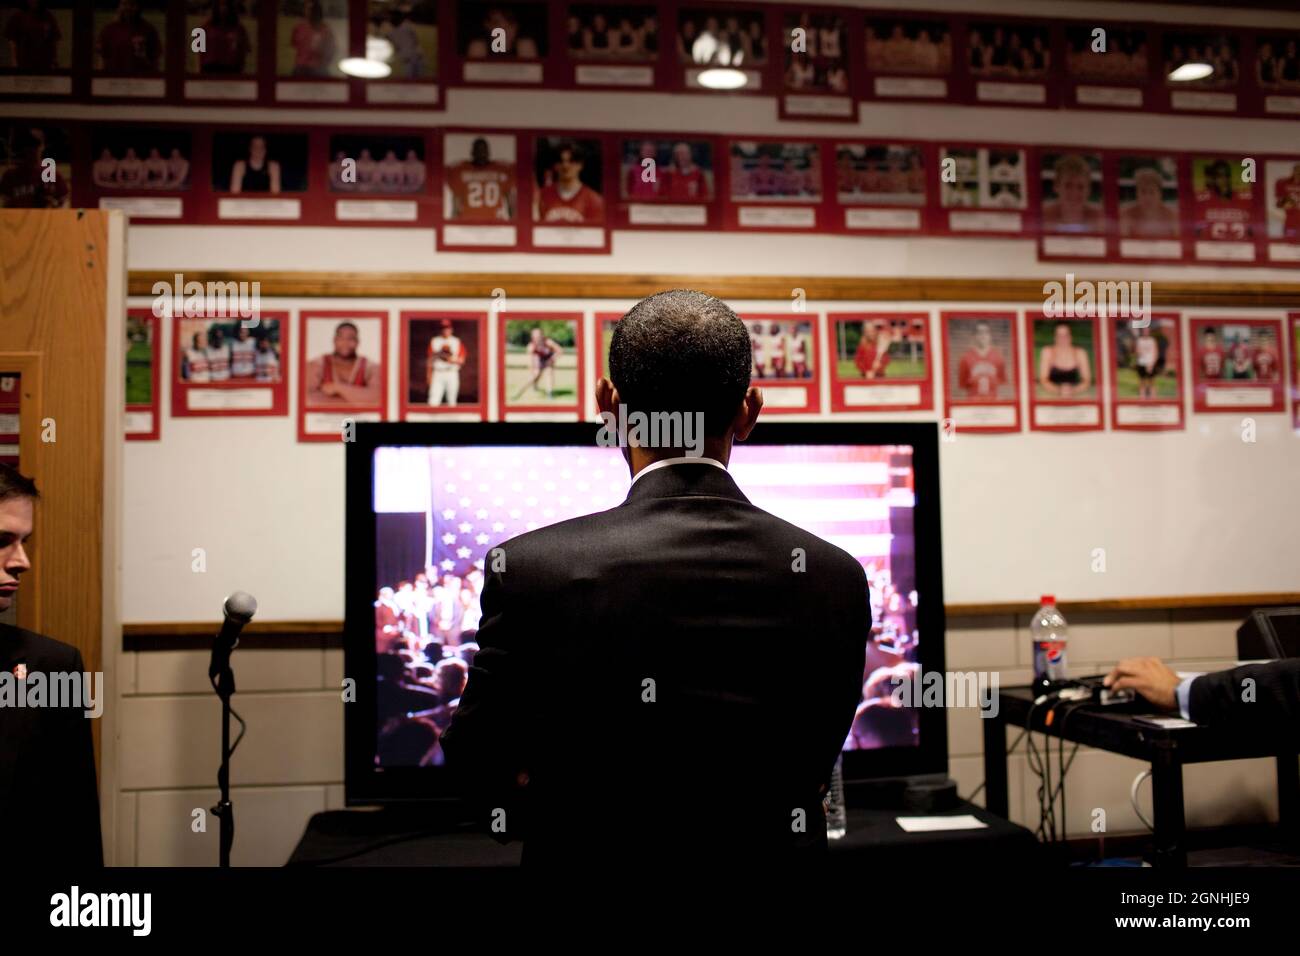 President Barack Obama in Cleveland, Ohio, prior to taking part in a health care town hall meeting at Shaker Heights High School in Cleveland on July 23, 2009.   (Official White House Photo by Pete Souza)  This official White House photograph is being made available for publication by news organizations and/or for personal use printing by the subject(s) of the photograph. The photograph may not be manipulated in any way or used in materials, advertisements, products, or promotions that in any way suggest approval or endorsement of the President, the First Family, or the White House. Stock Photo